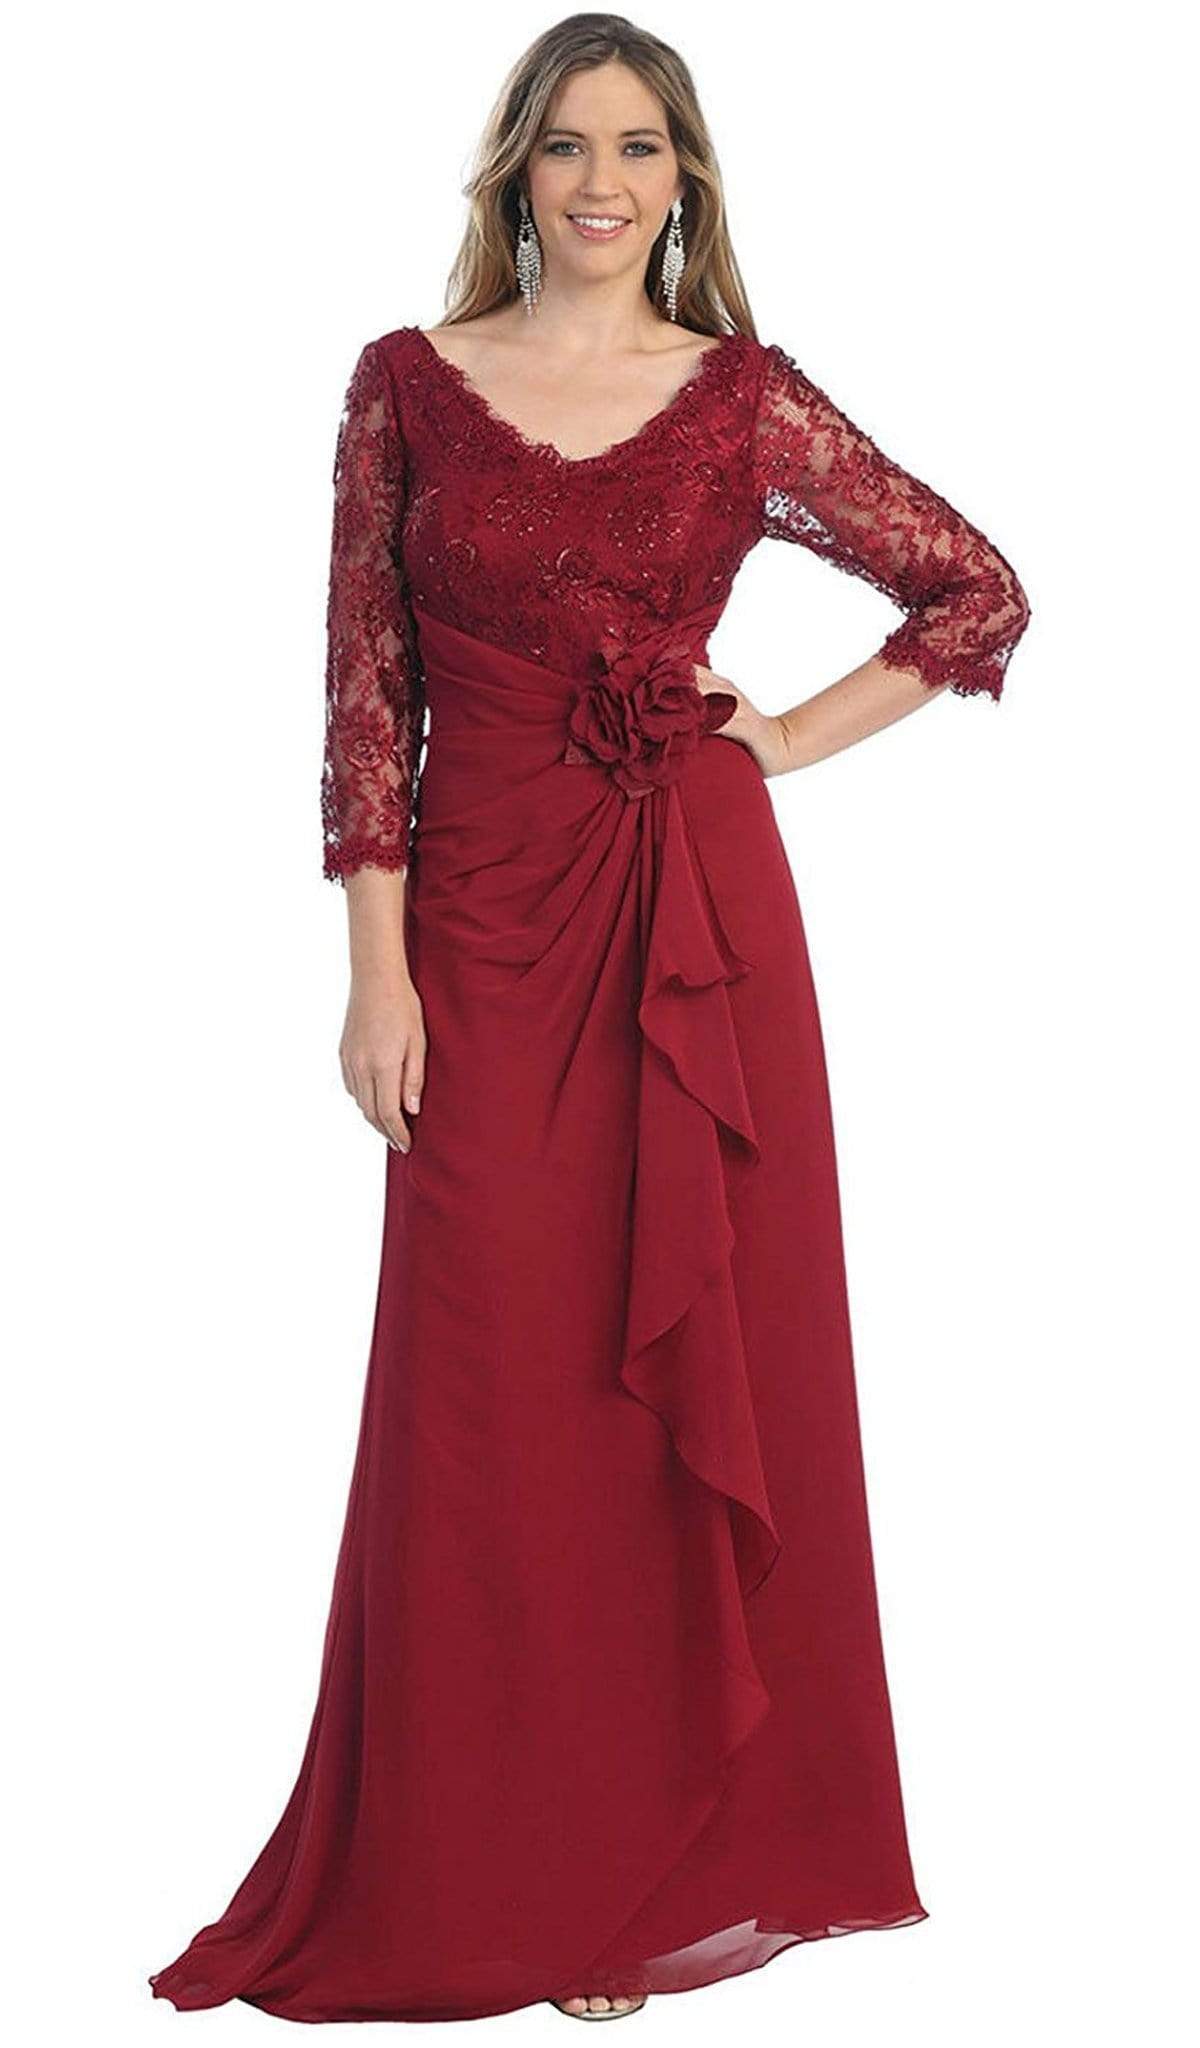 May Queen - Sheer Long Sleeve Floral Accented A-Line Evening Dress Special Occasion Dress M / Burgundy